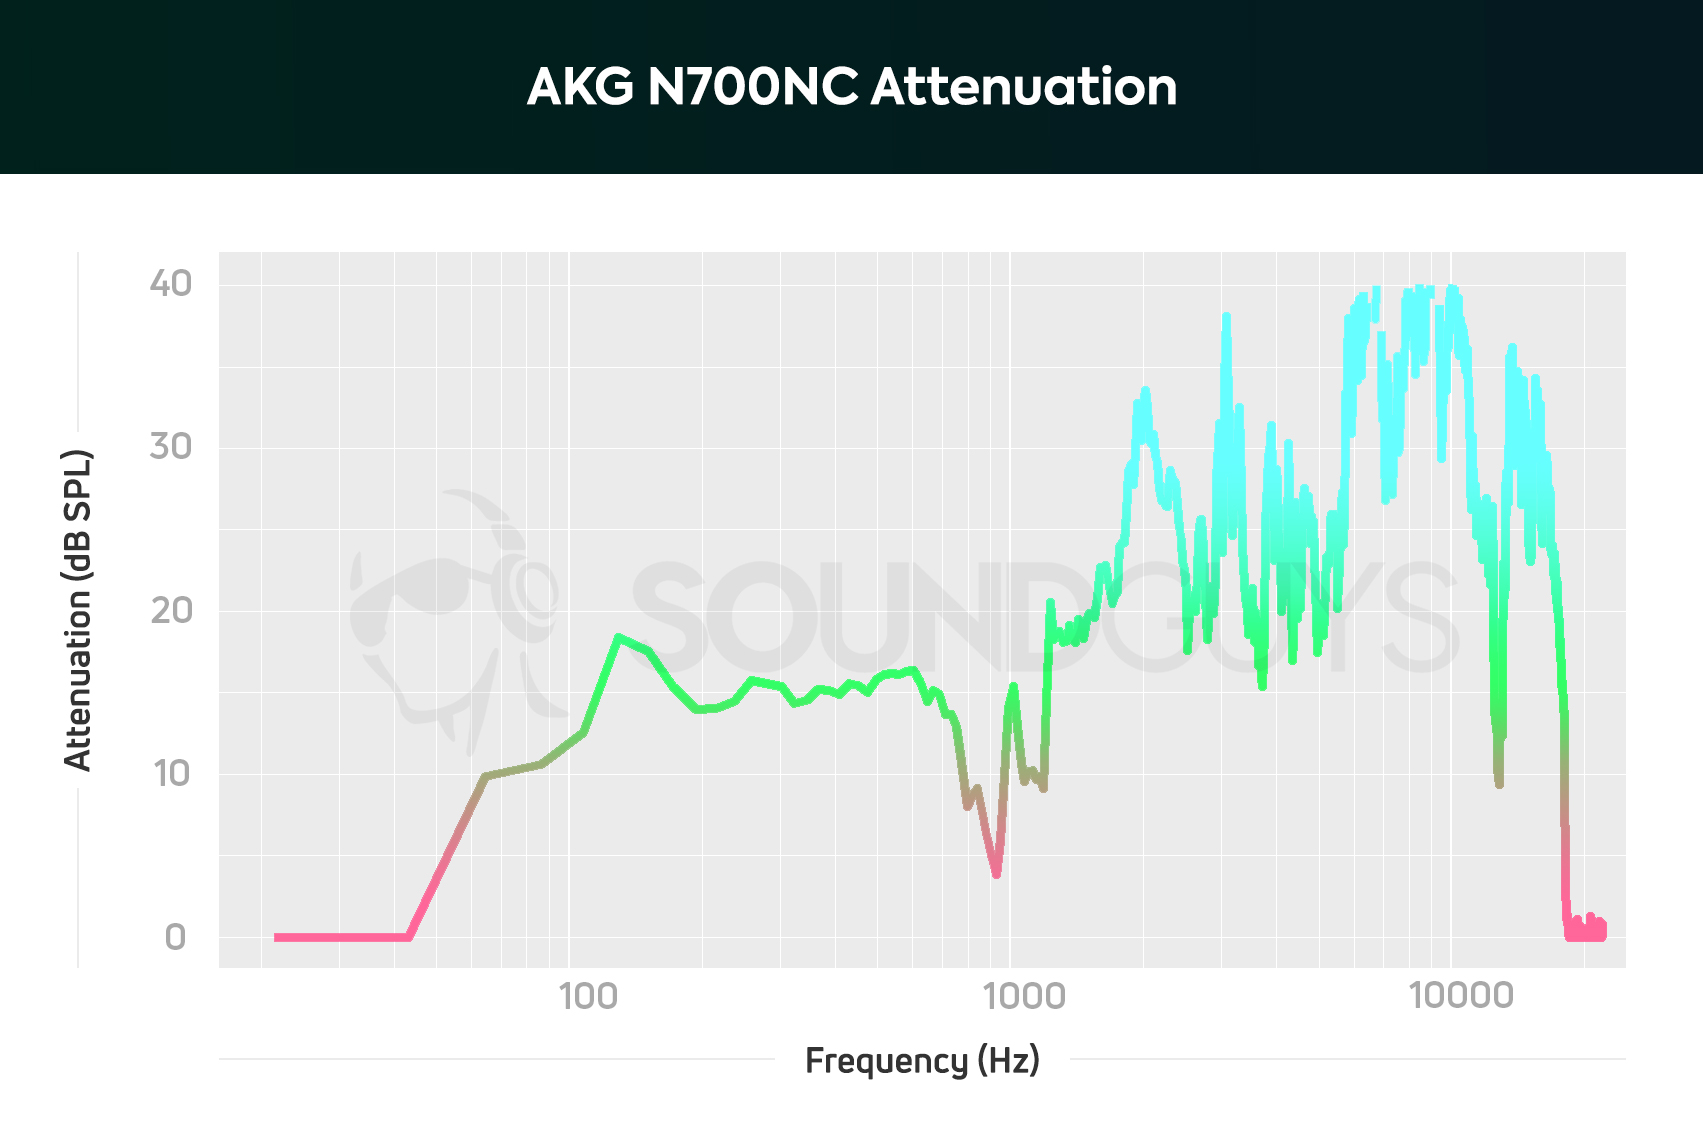 AKG N700NC headphones attenuation with noise cancelling turned on.